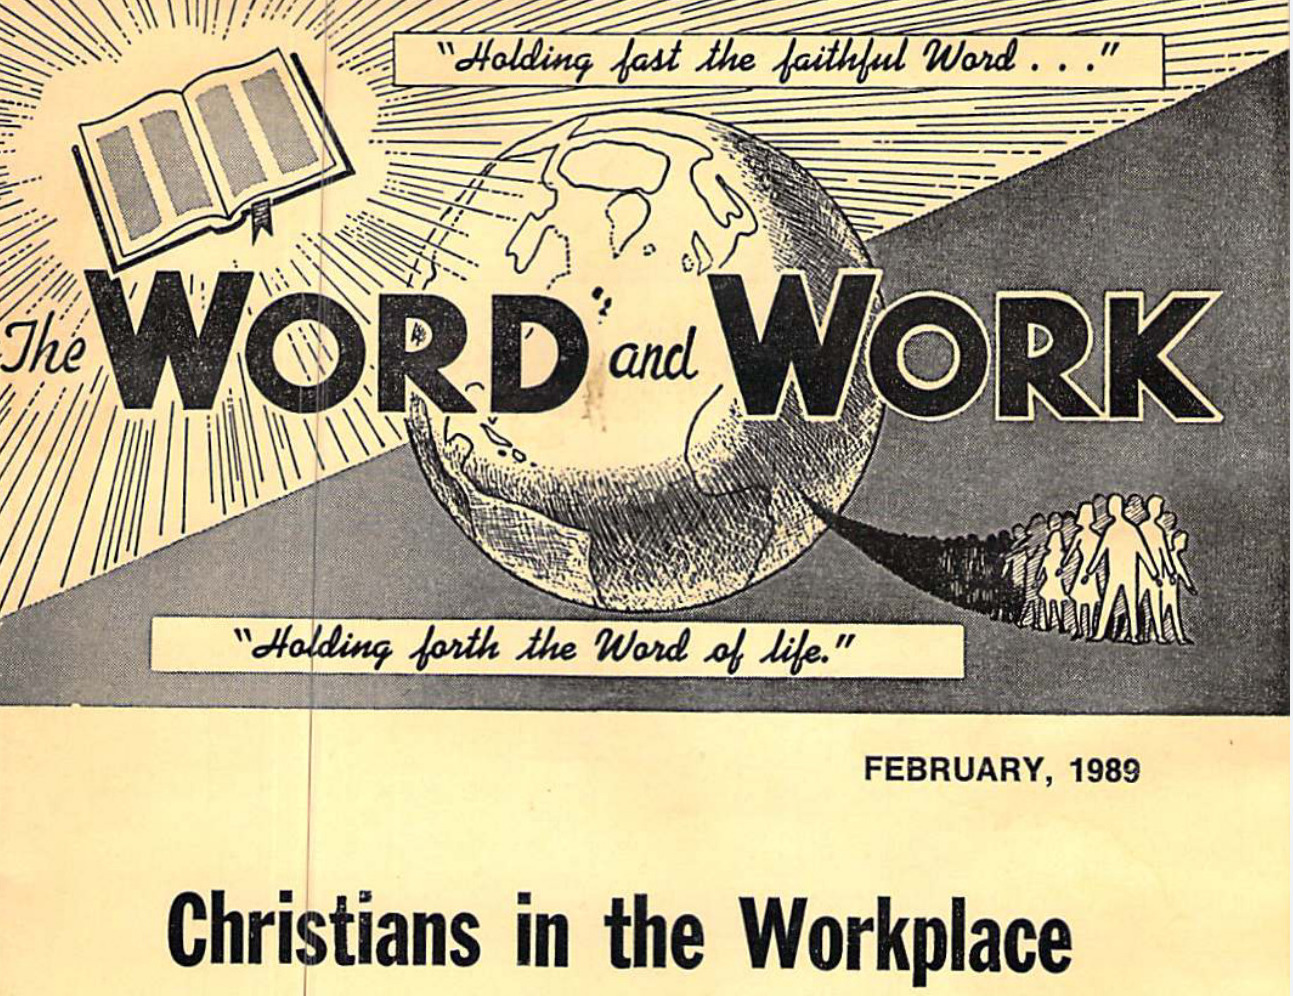 Word and Work is a religious monthly journal founded in 1908 that is affiliated with Churches of Christ.